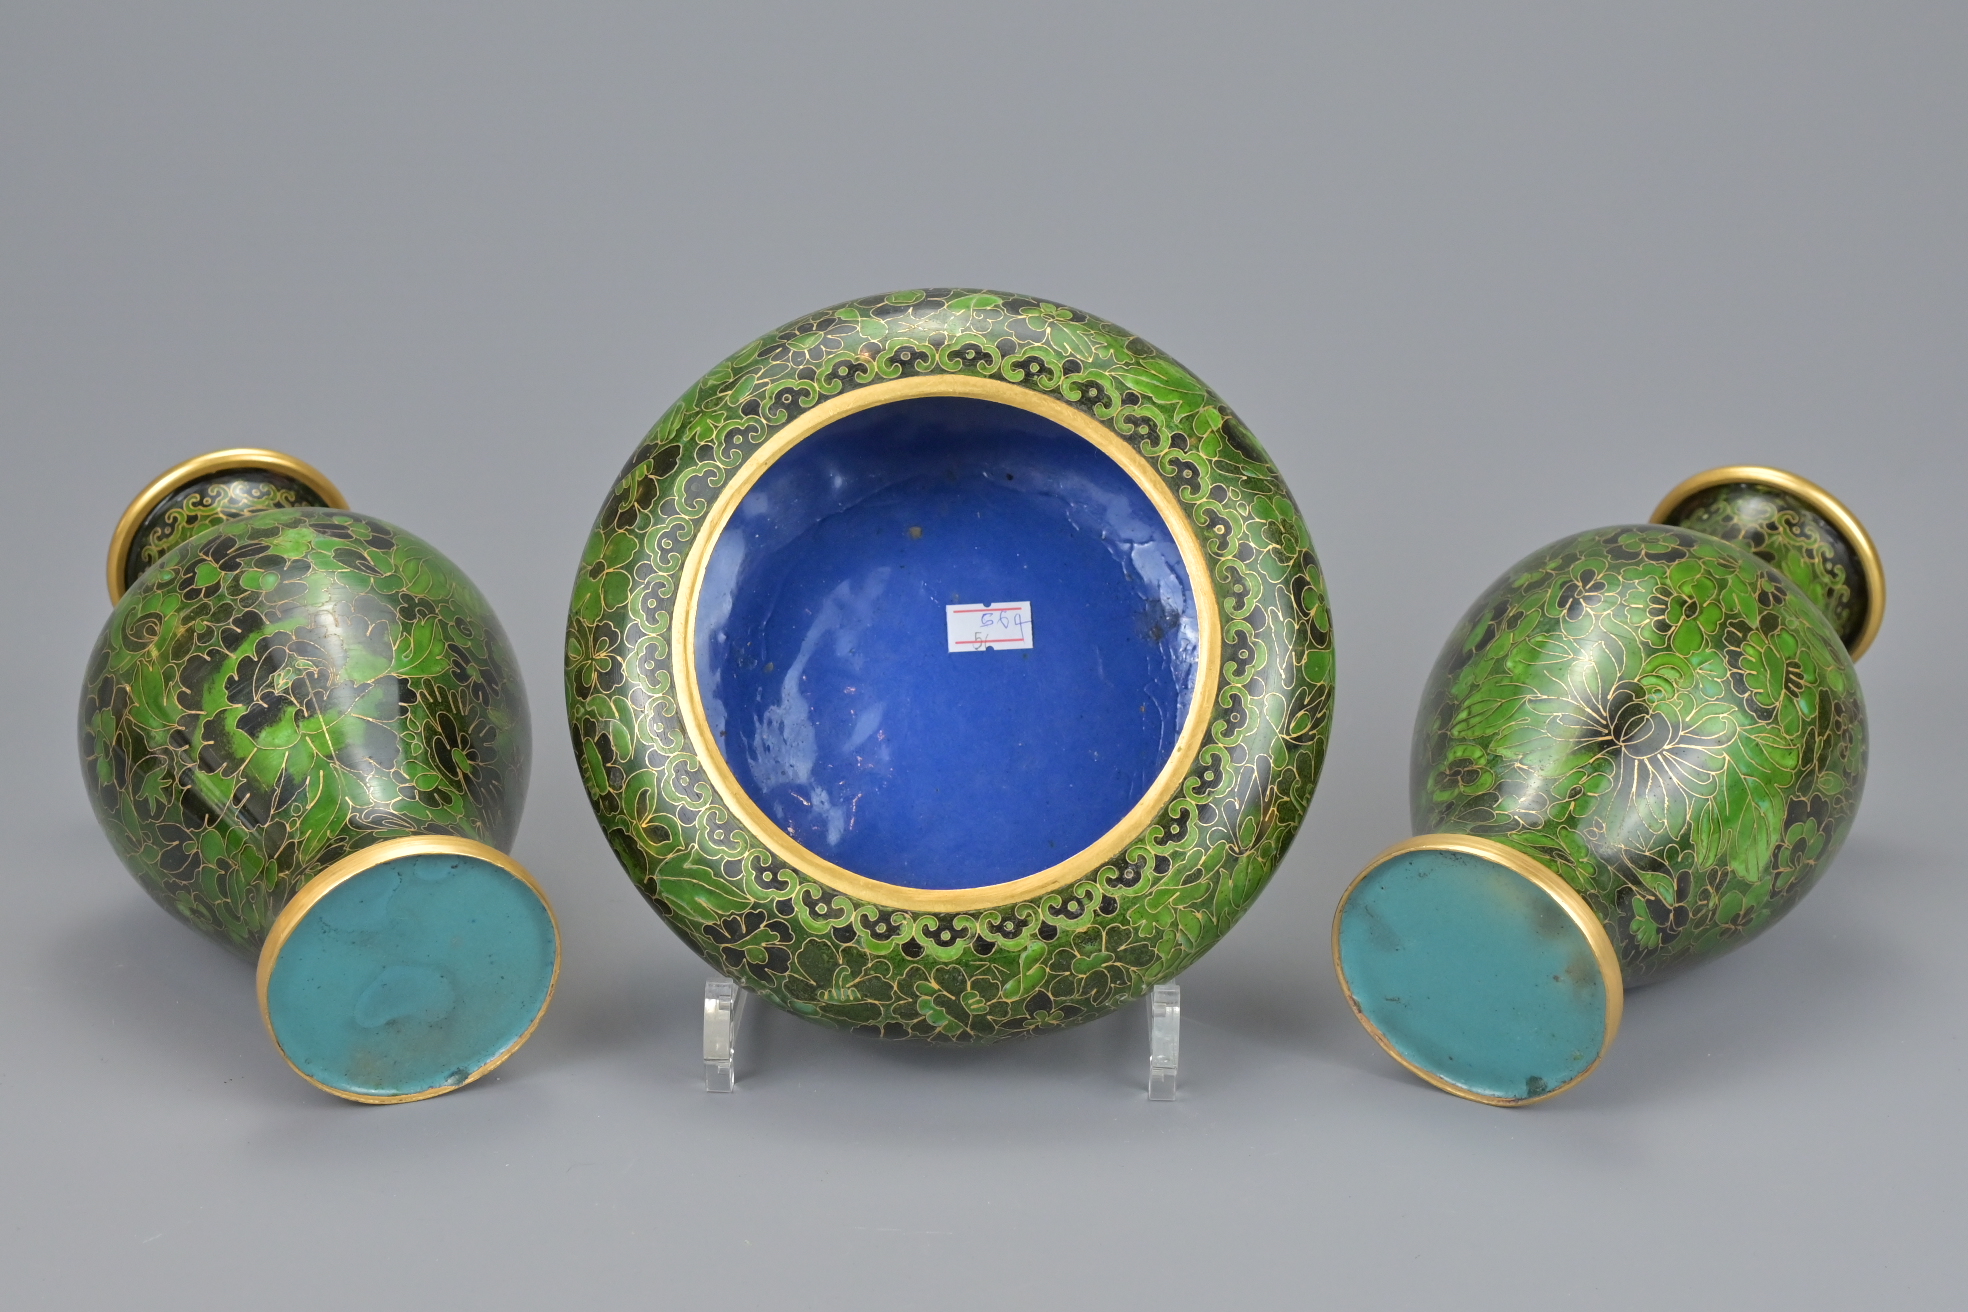 PAIR OF CHINESE CLOISONNE VASES - Image 3 of 4